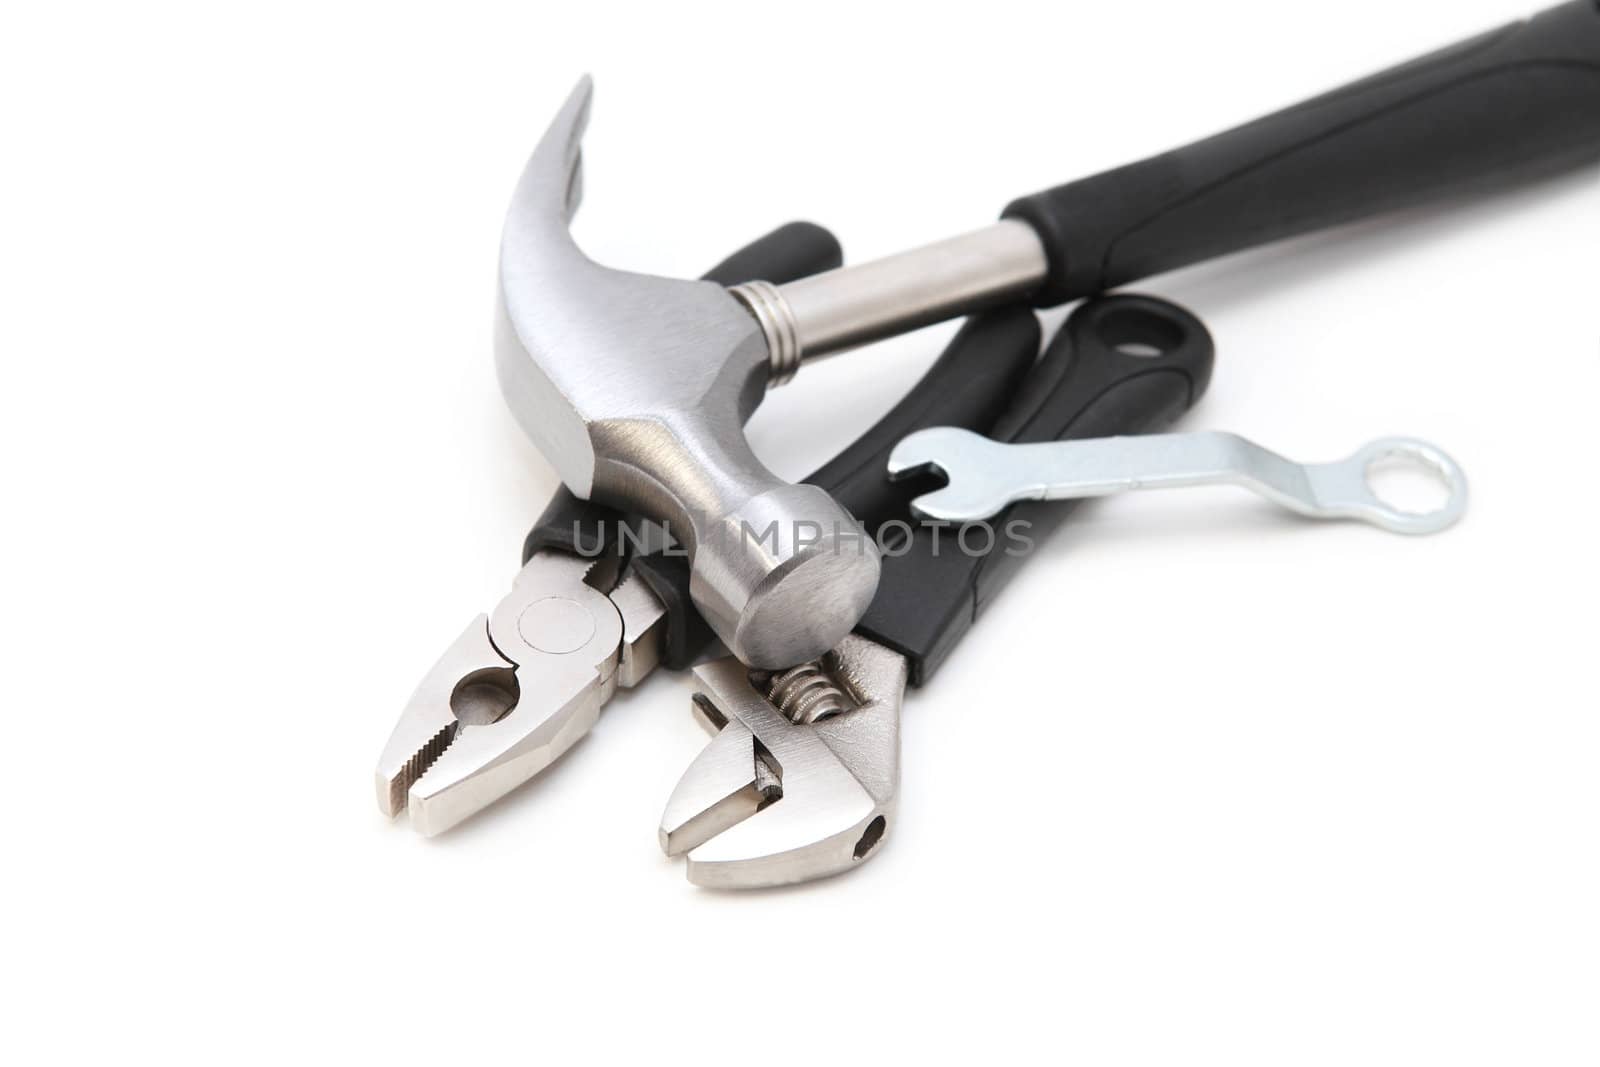 working tools - pliers, key, hammer, wrench on white